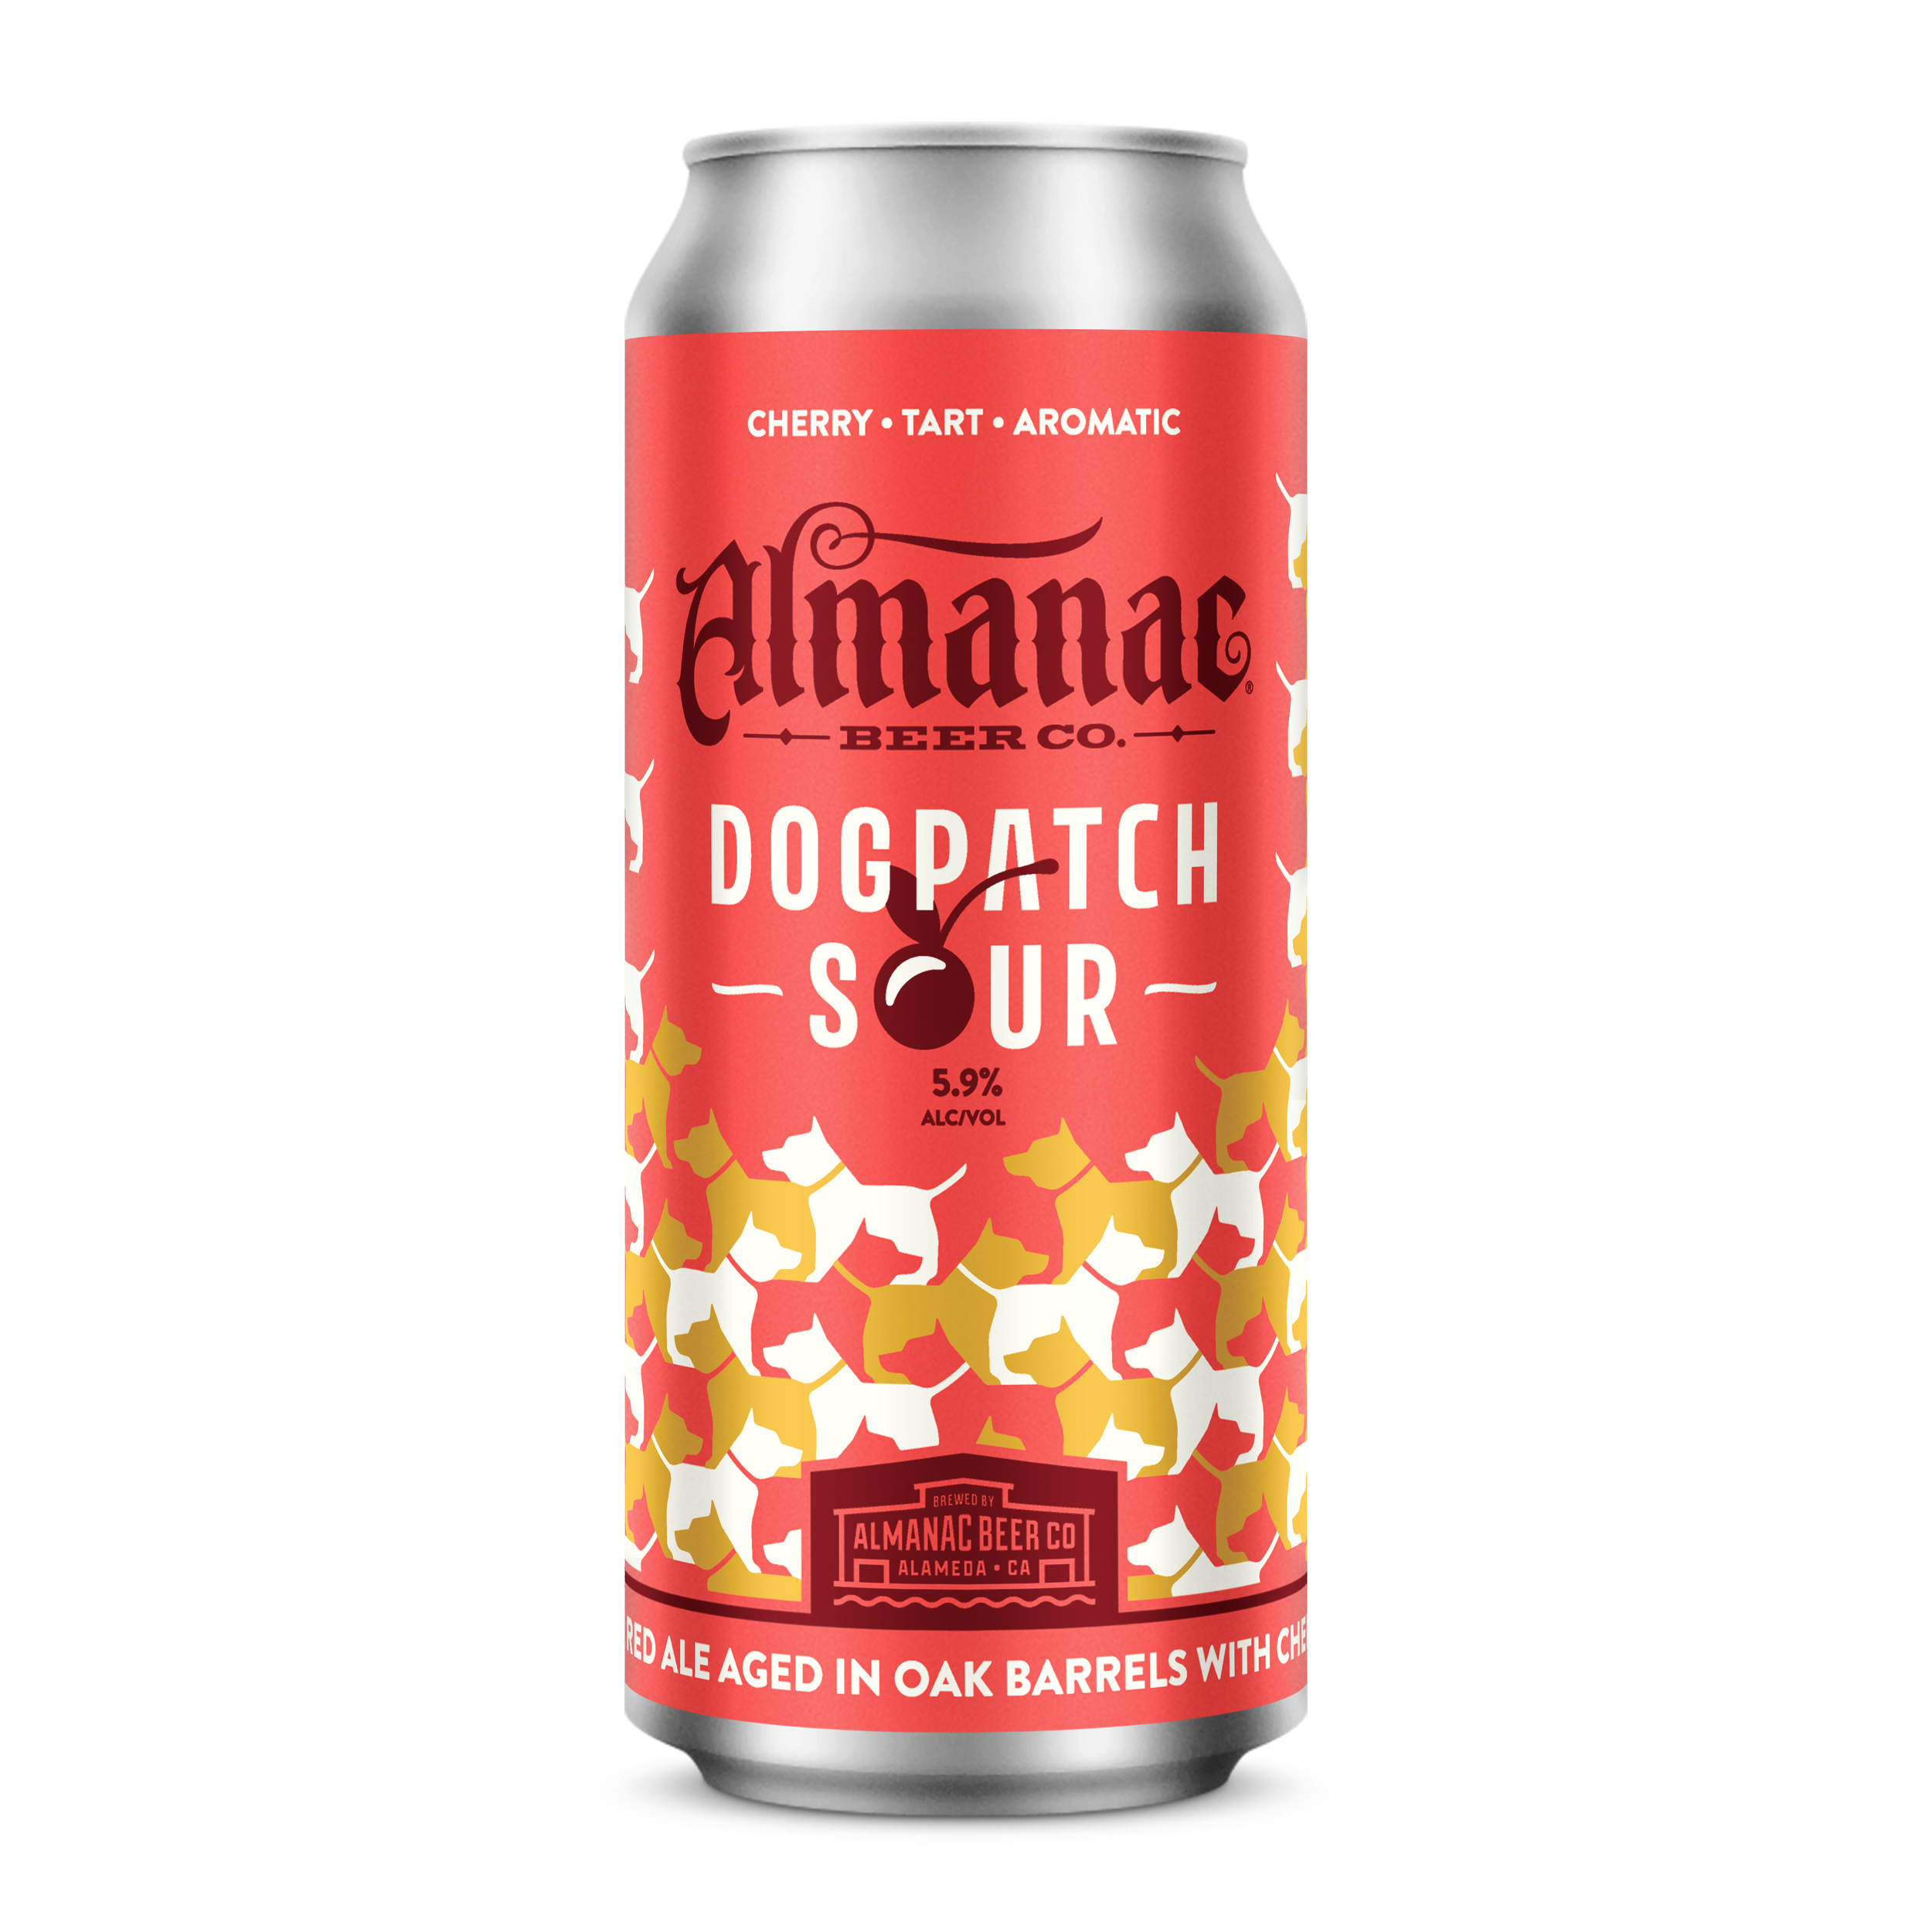 Almanac Dogpatch Sour Beer Can Design by DKNG